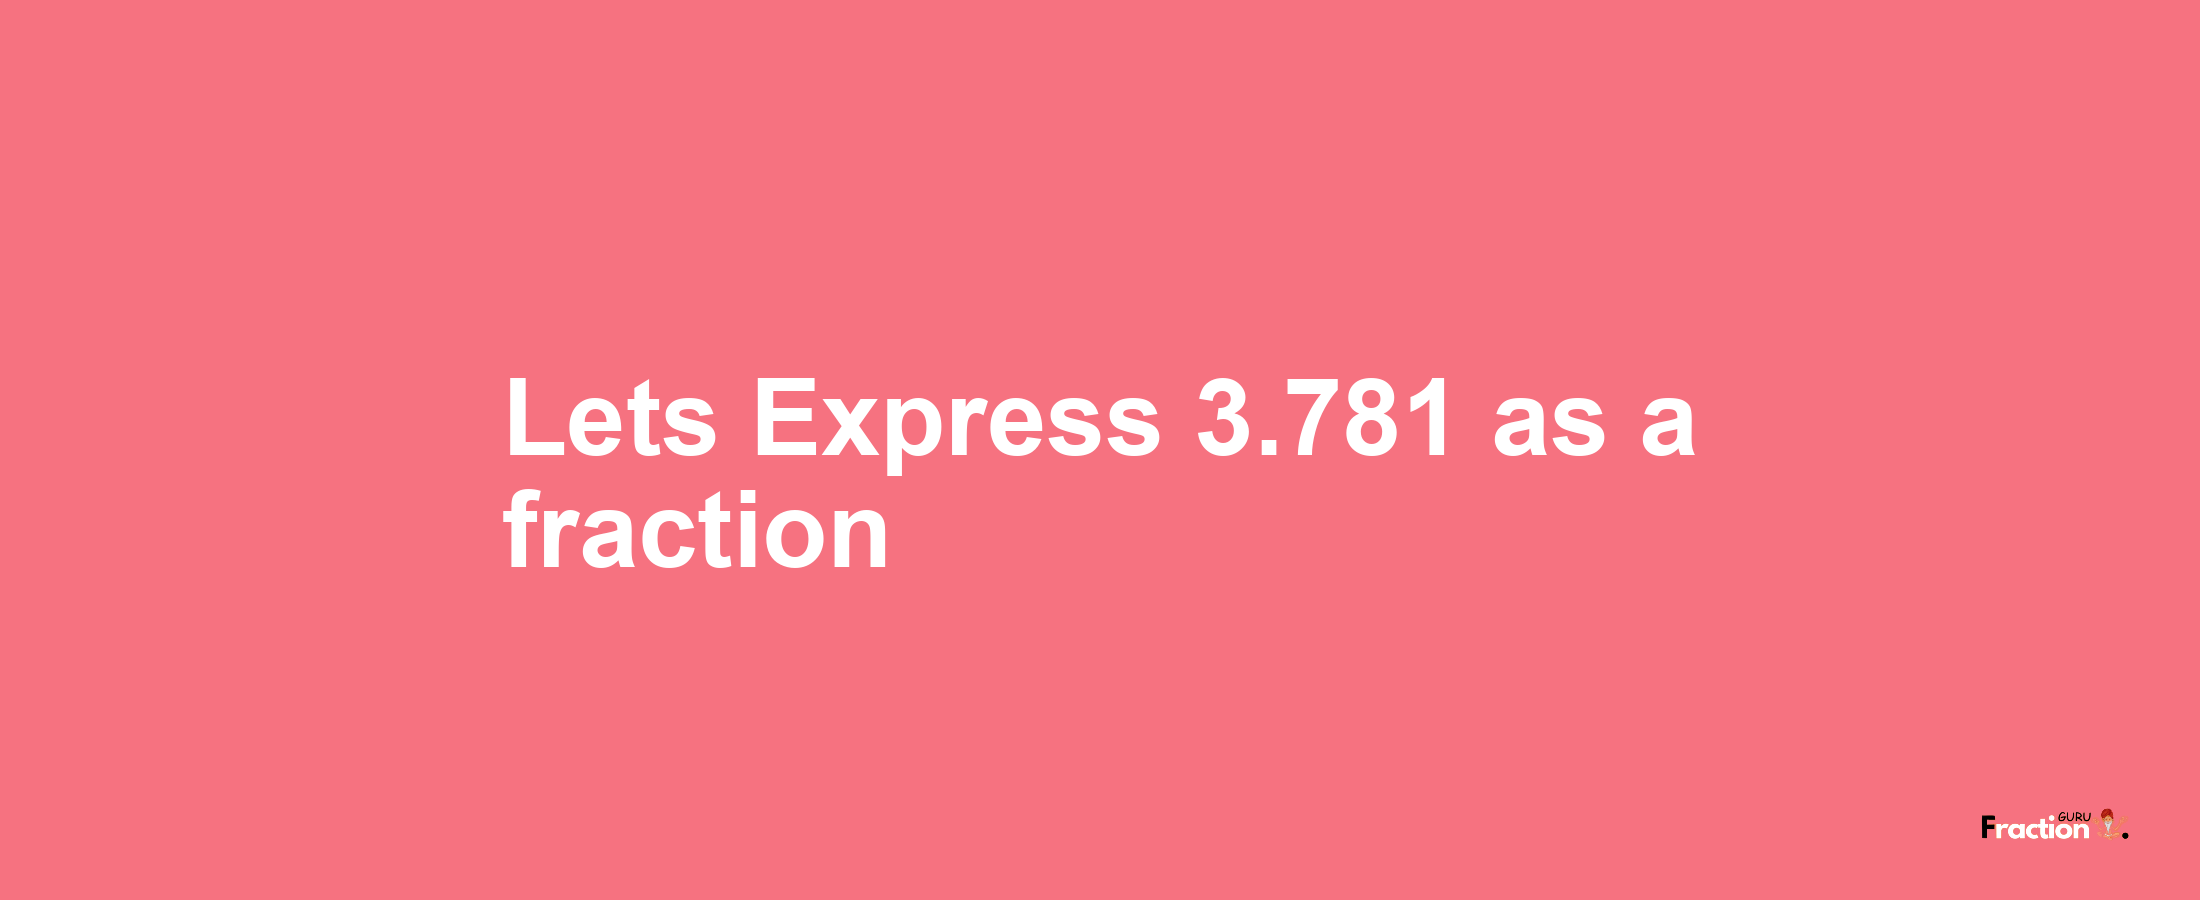 Lets Express 3.781 as afraction